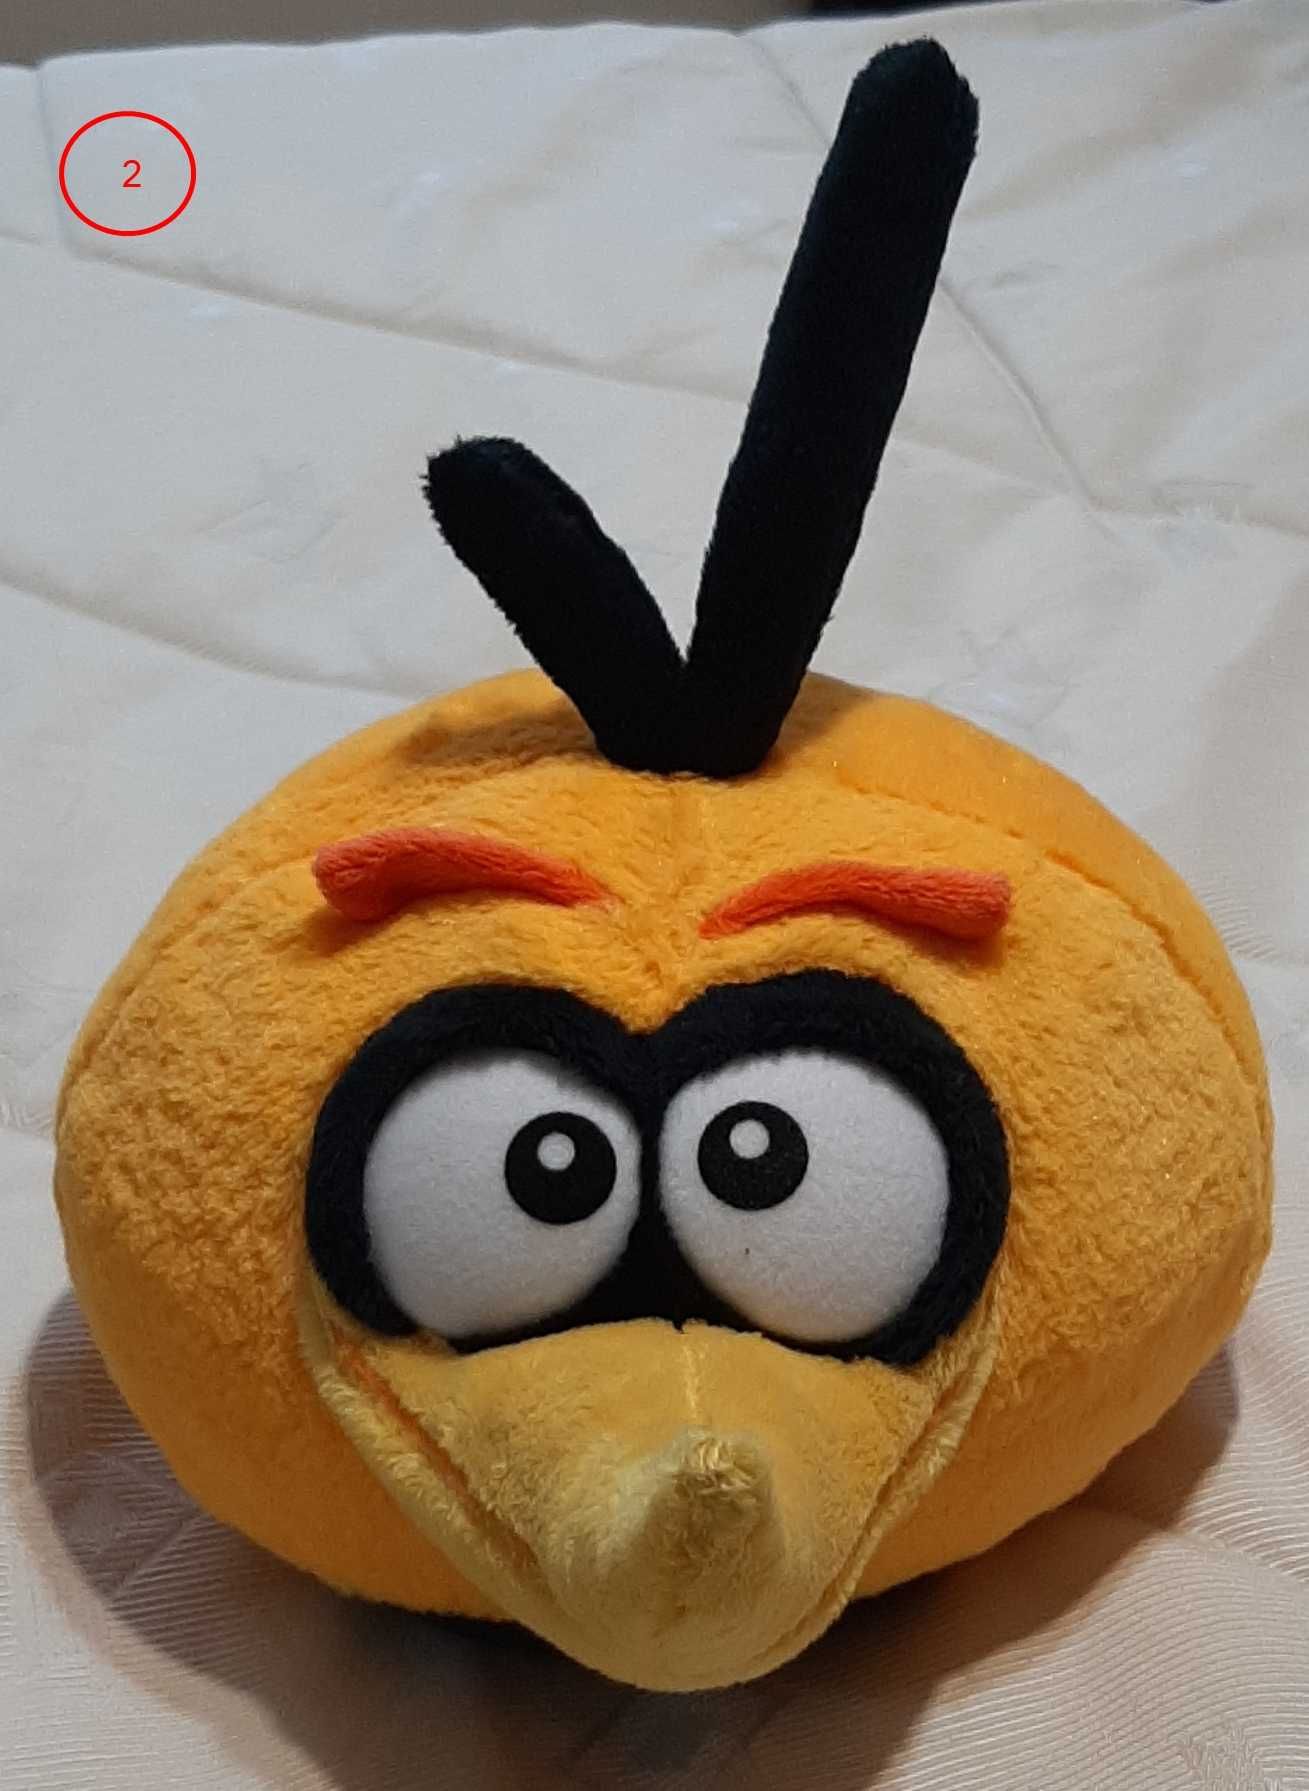 Peluches - Angry Birds e Pingo Doce